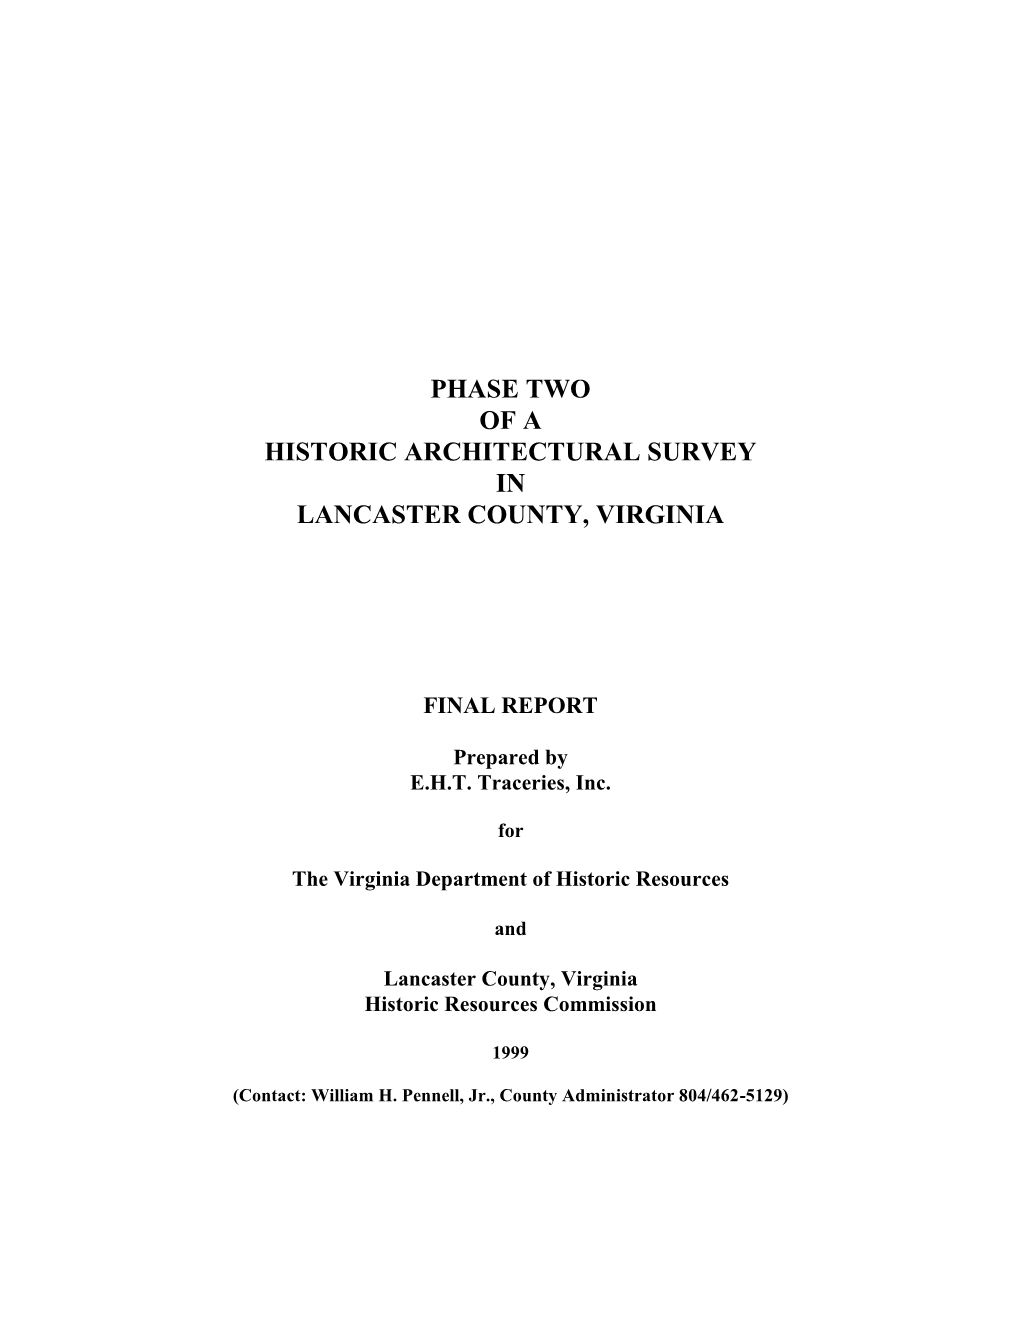 Historic Architectural Survey Report of Lancaster County, Virginia," Prepared in 1997